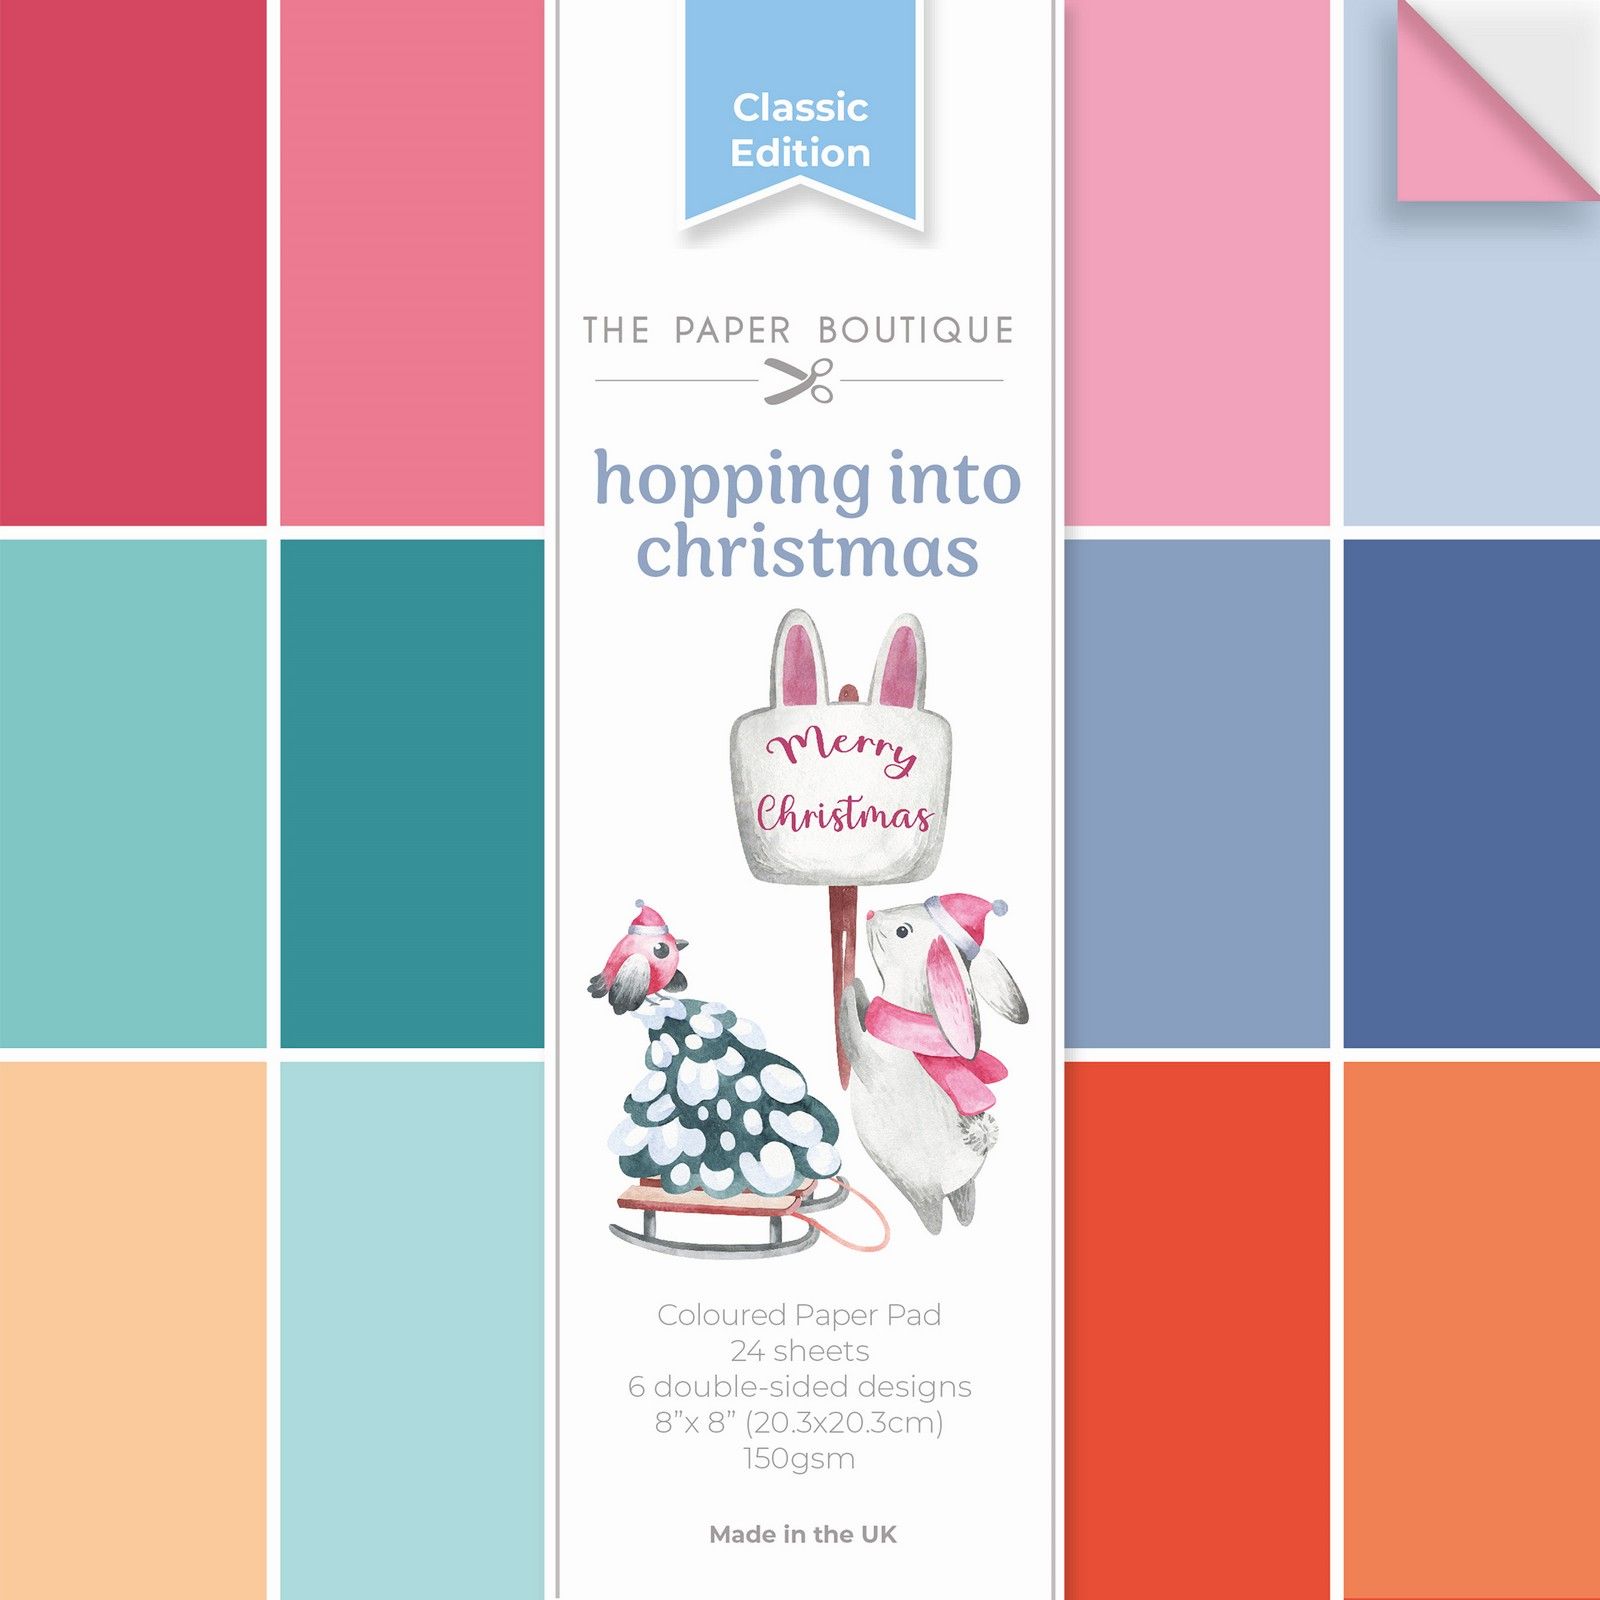 The Paper Boutique • Hopping into Christmas Colour Card Pad 20,3x20,3cm